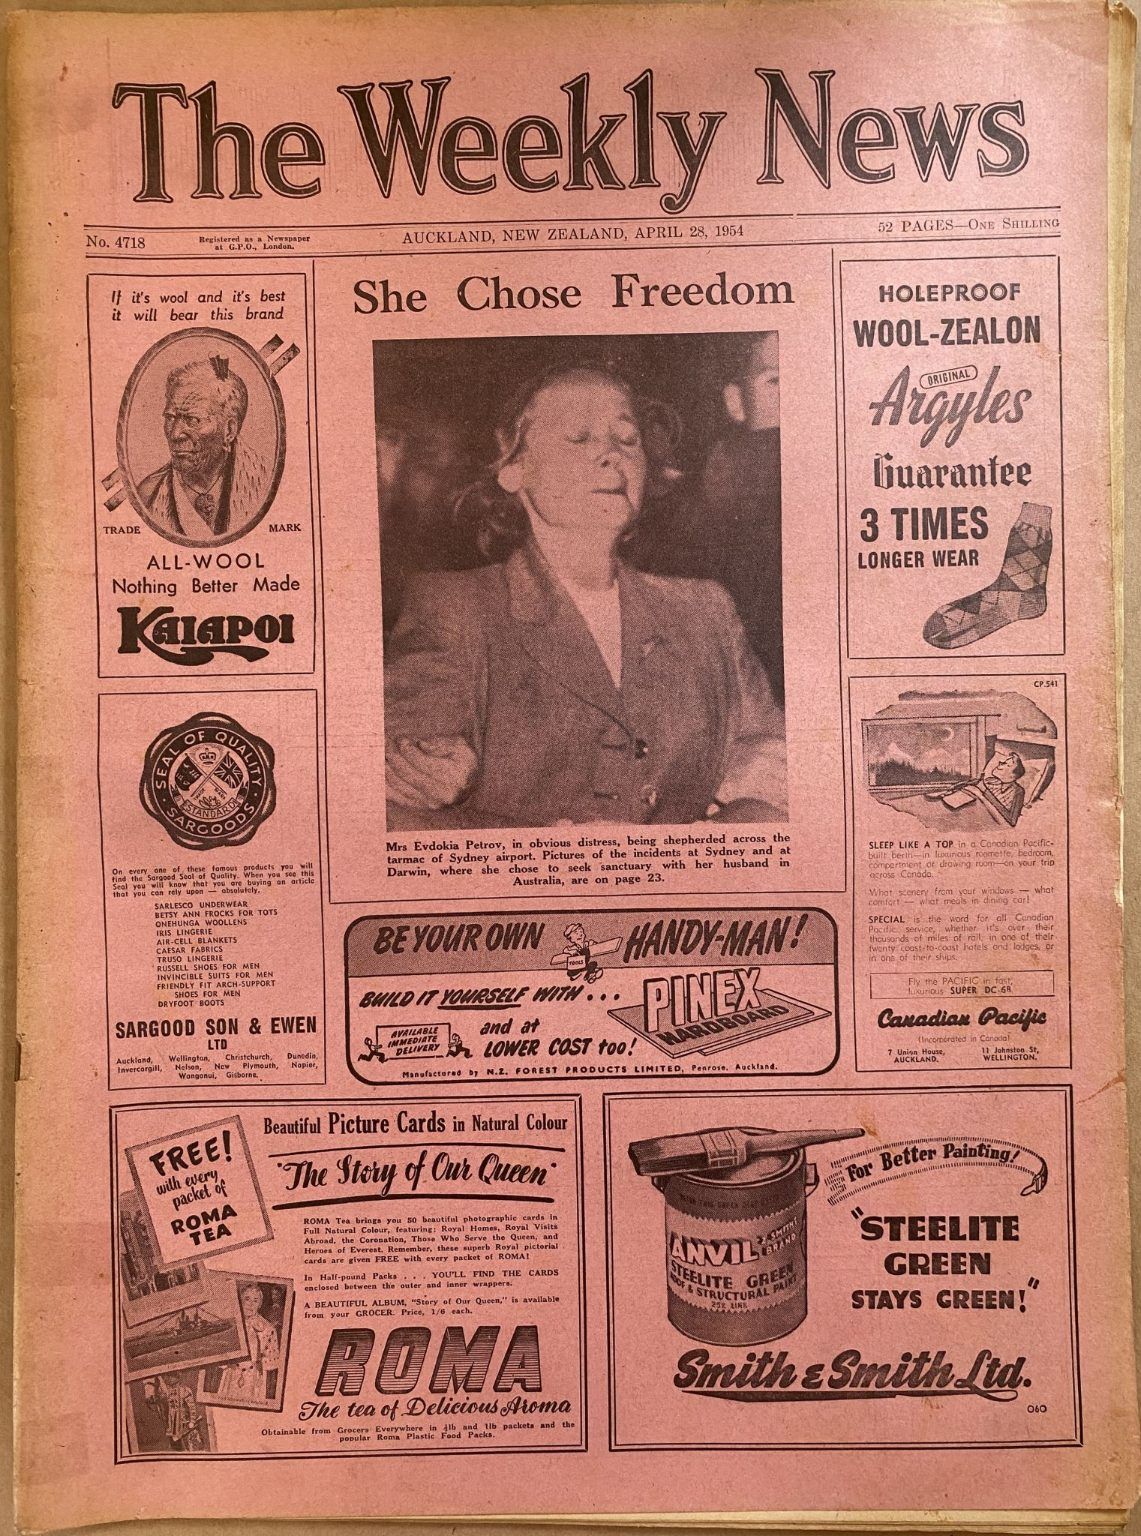 OLD NEWSPAPER: The Weekly News - No. 4718, 28 April 1954